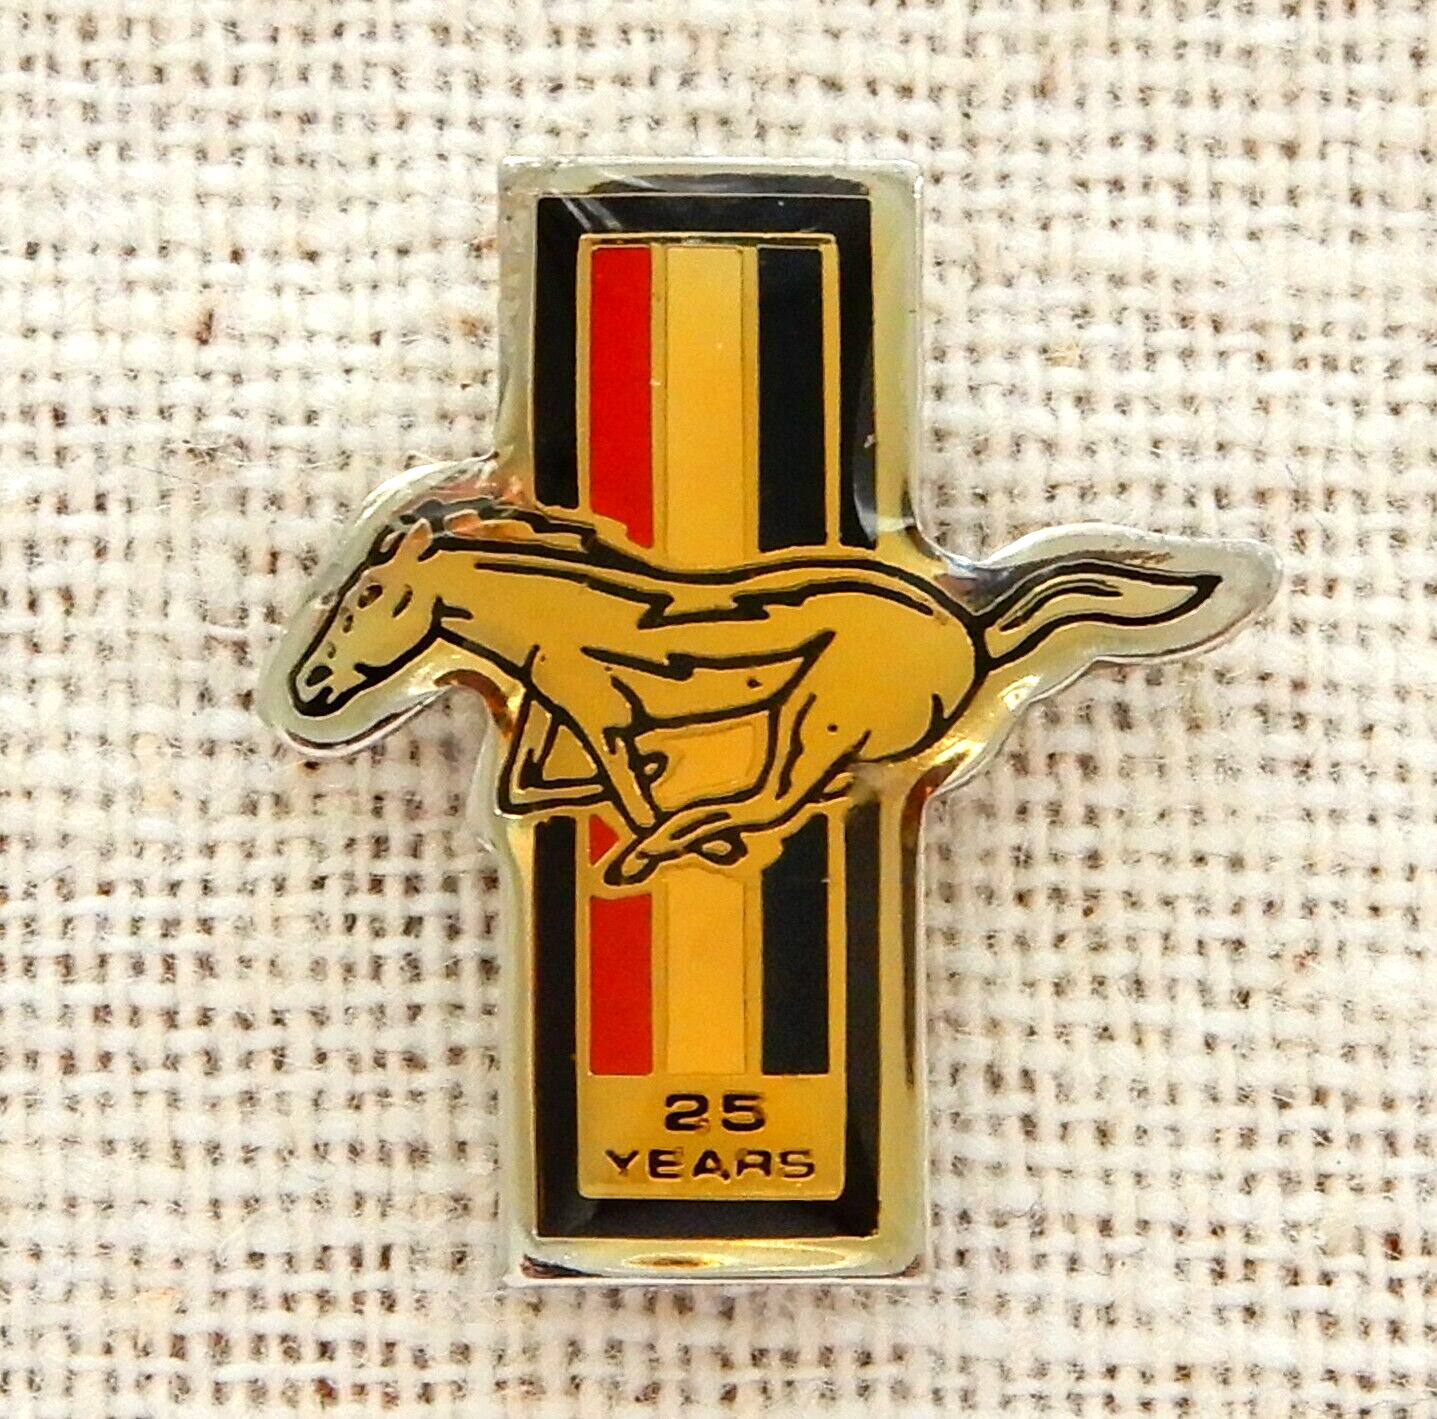 Ford Mustang Lapel Pin Vintage 25 Years Logo Silver Tone Horse Automobile Car